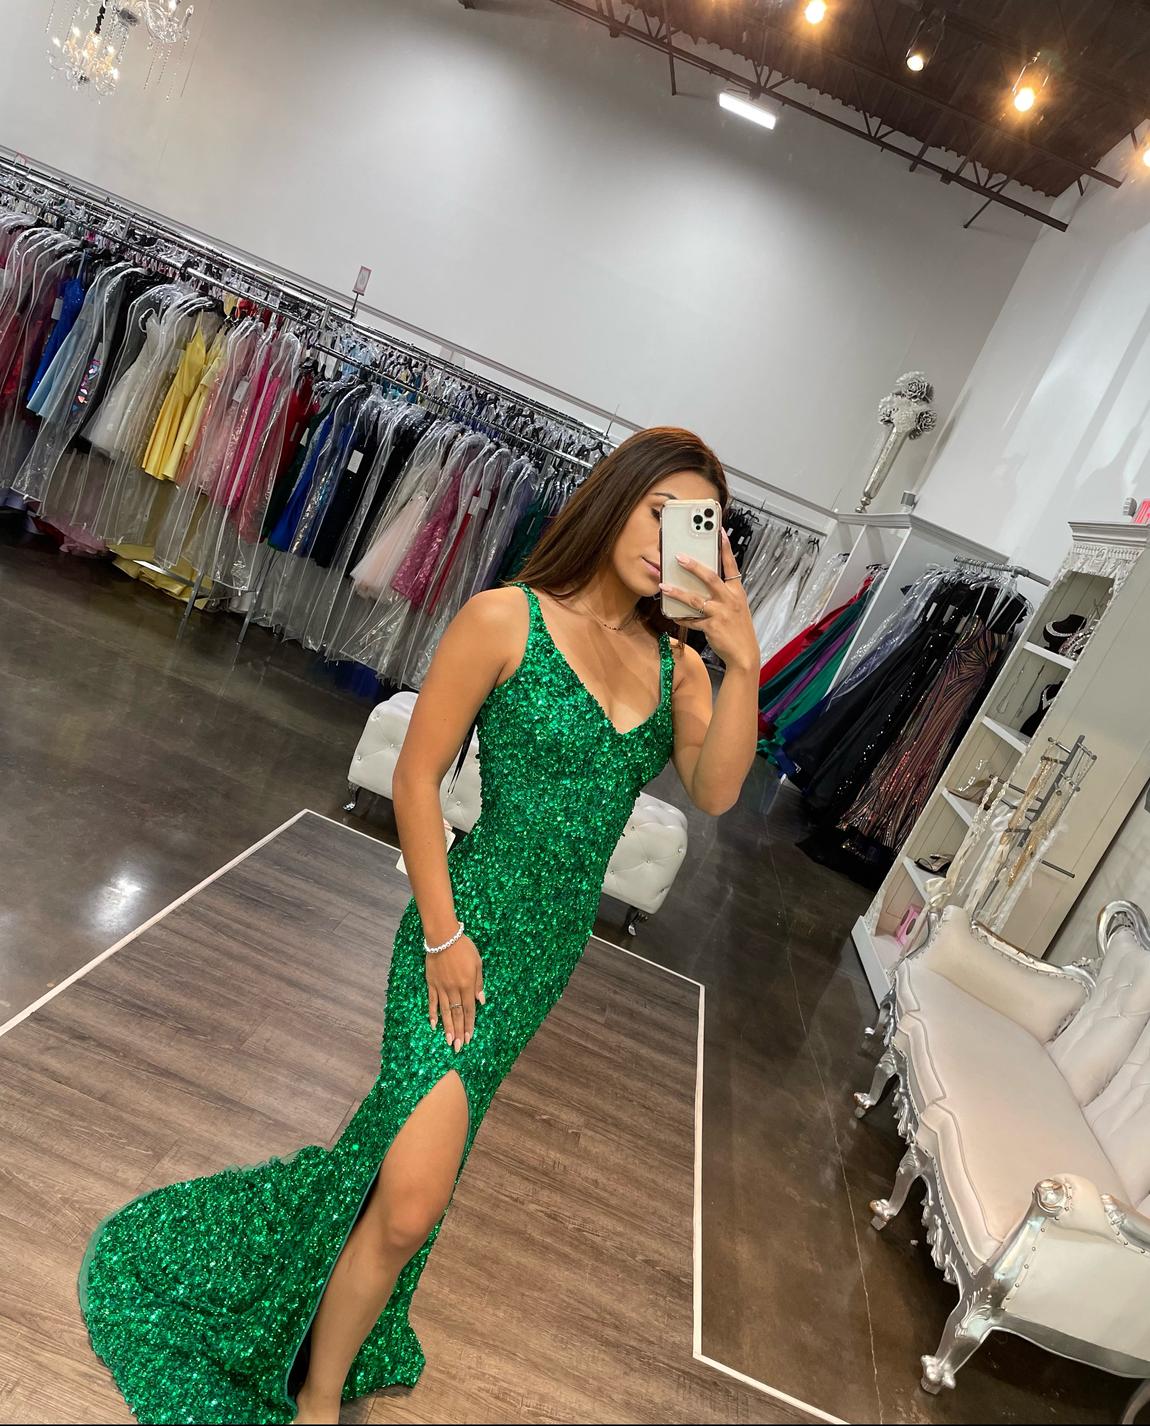 Style 53450 Sherri Hill Size 0 Sequined Green Side Slit Dress on Queenly